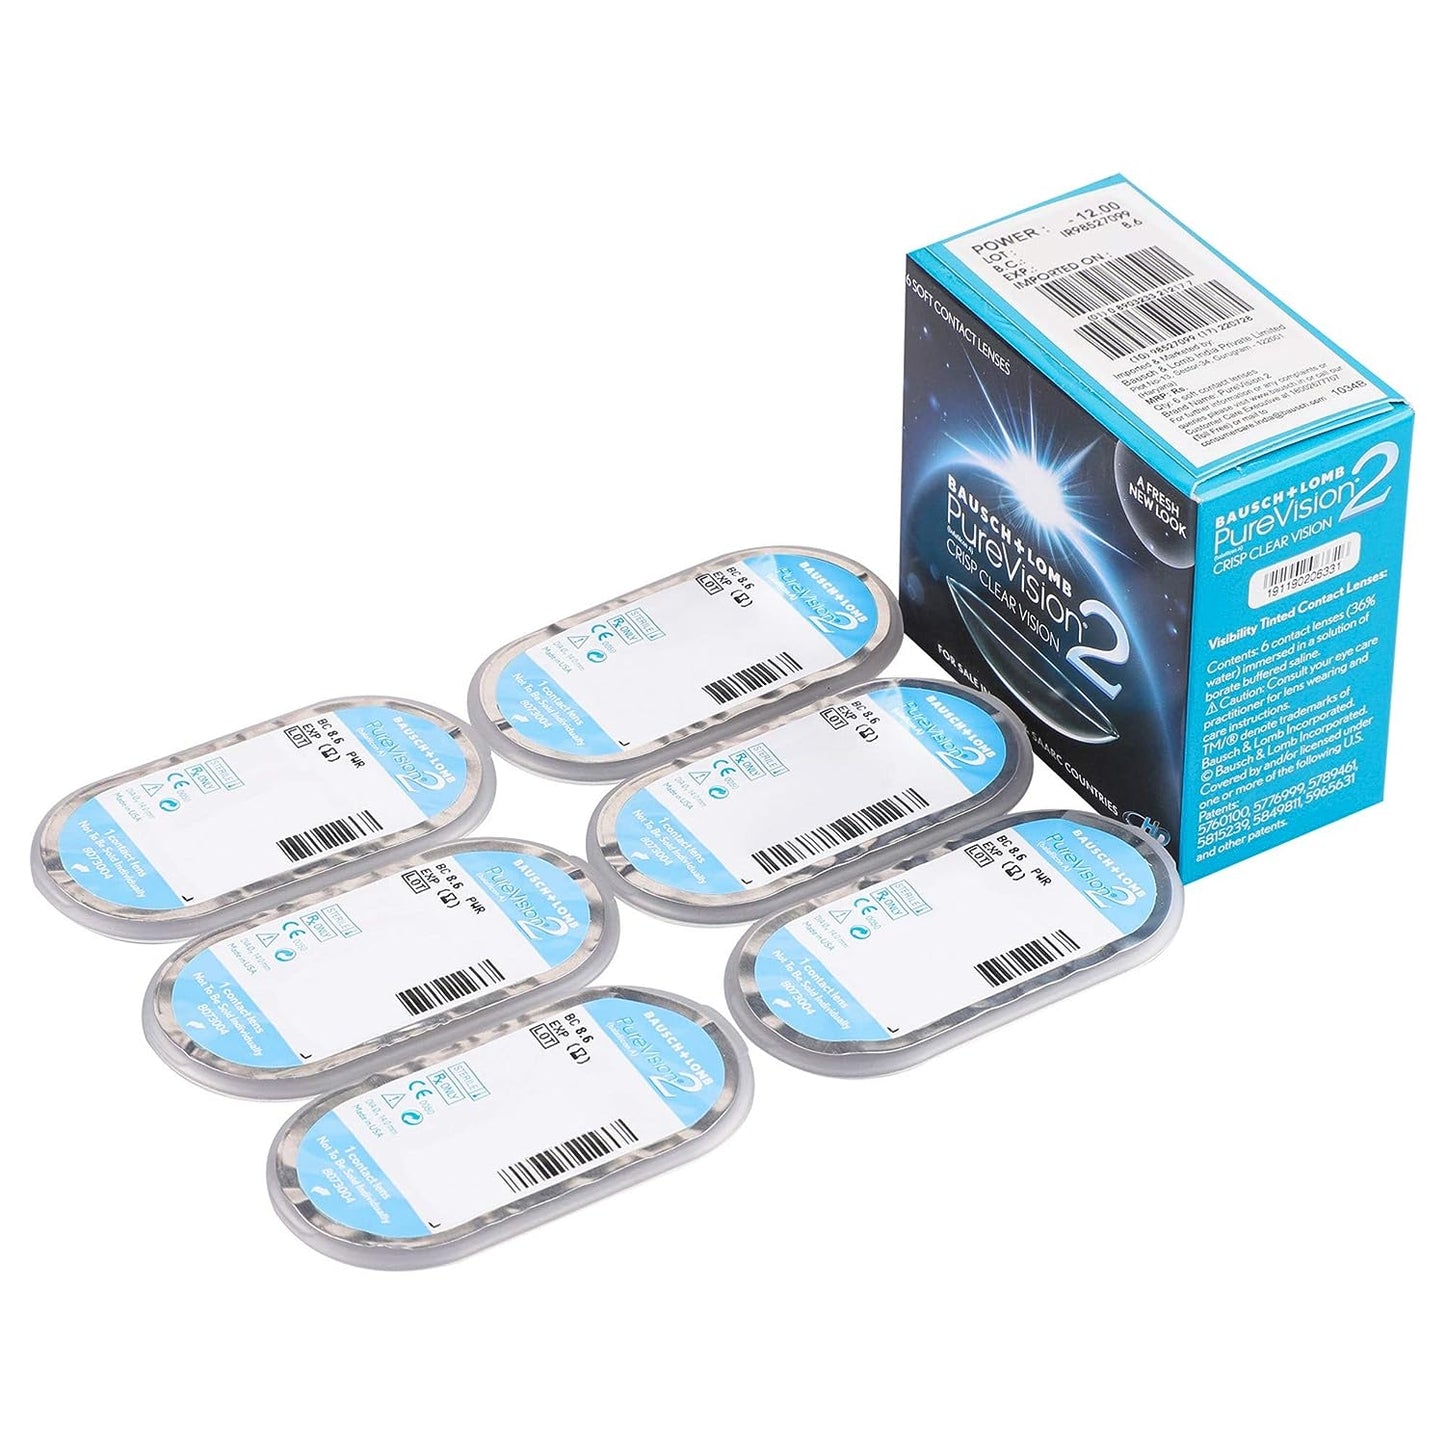 Bausch & Lomb Purevision 2 Monthly Disposable Contact Lens ( Clear, 6 Lenses)